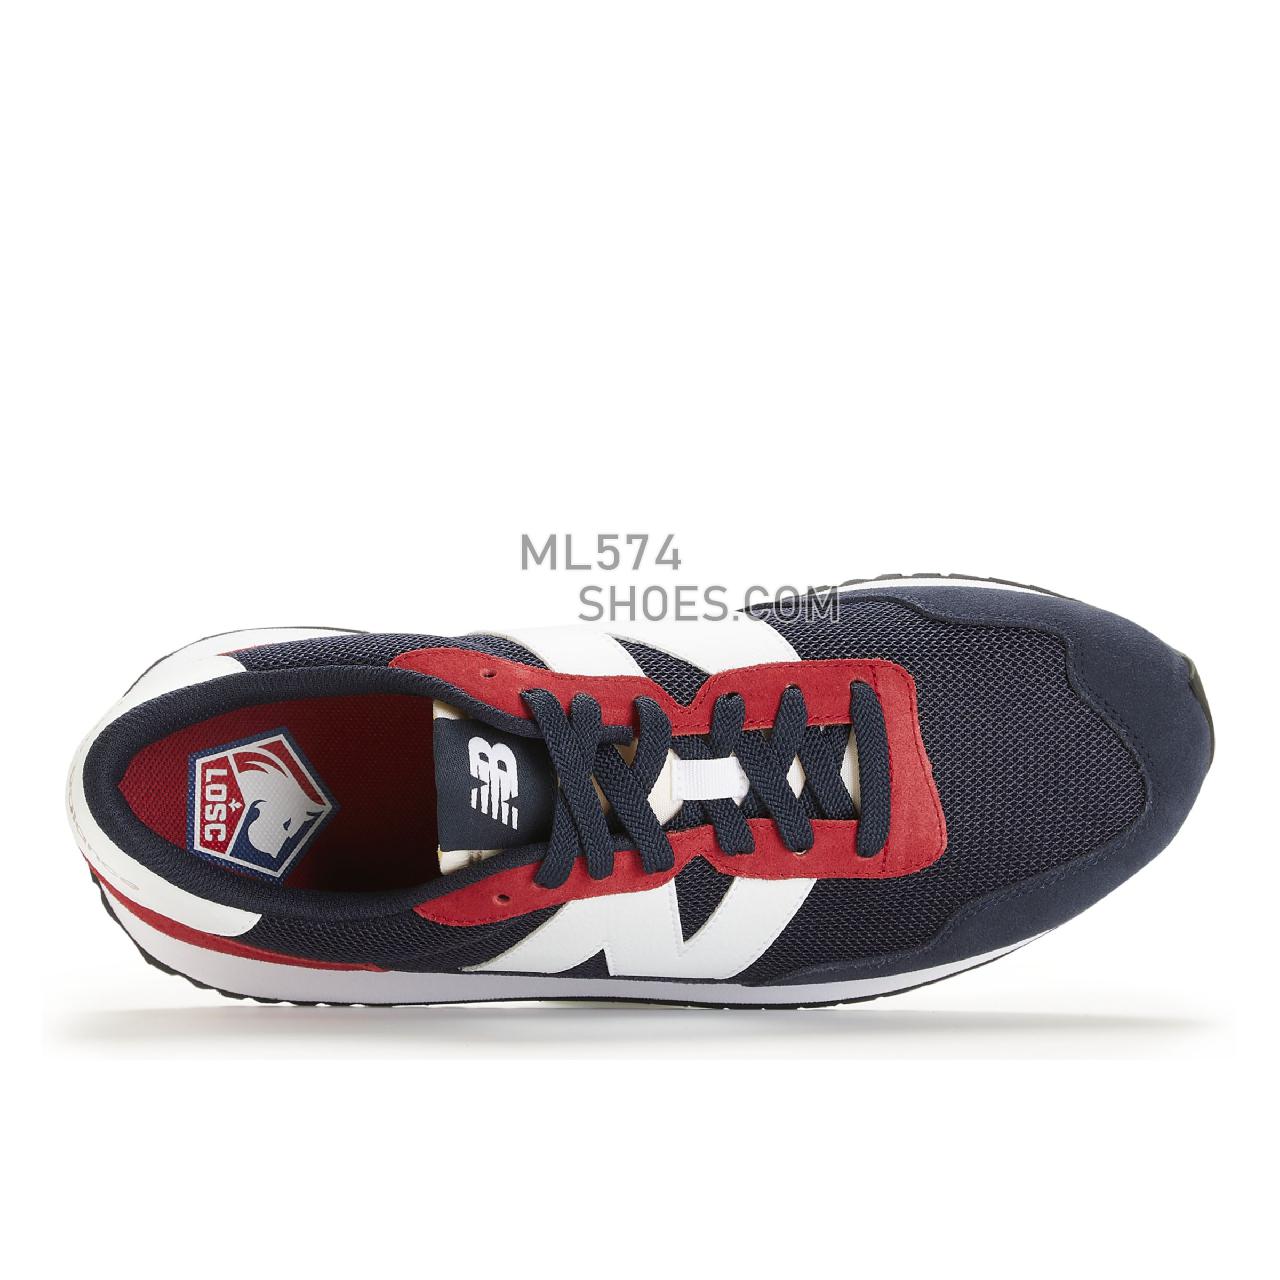 New Balance 237V1 LOSC Lille - Men's Classic Sneakers - Eclipse with Jester Red - MS237LOS